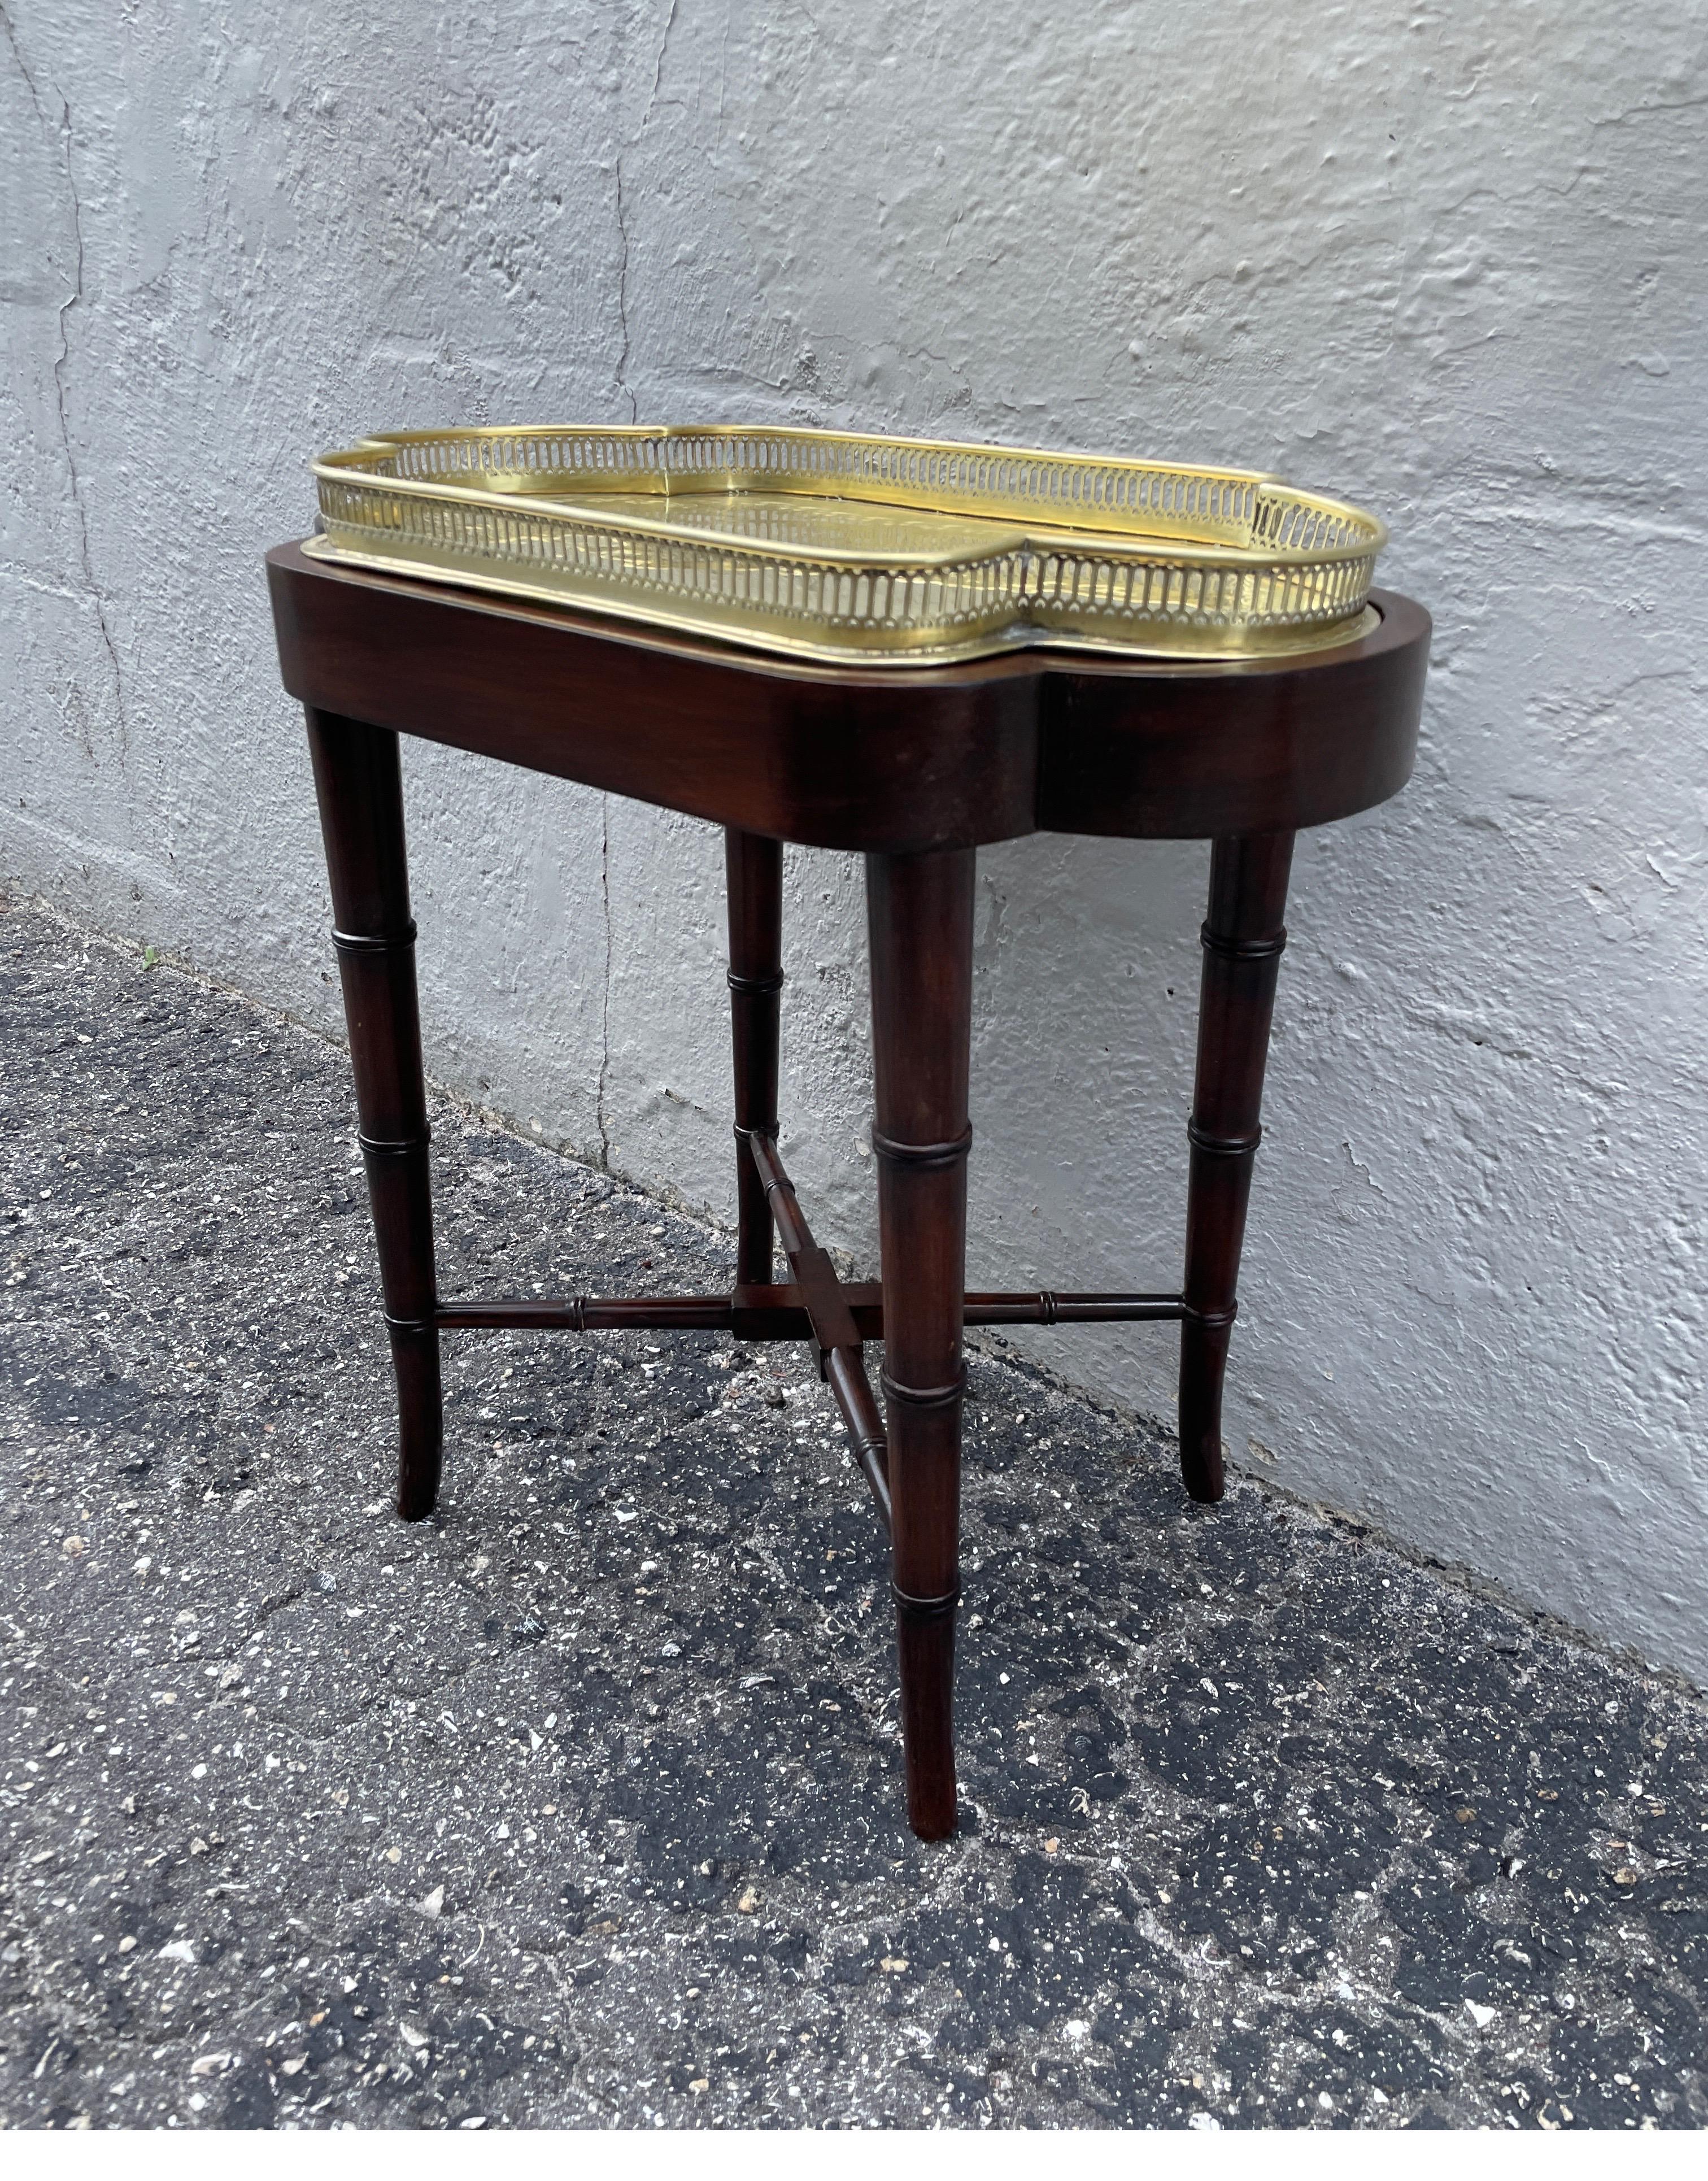 Antique Brass Galleried Tray Table In Good Condition For Sale In West Palm Beach, FL